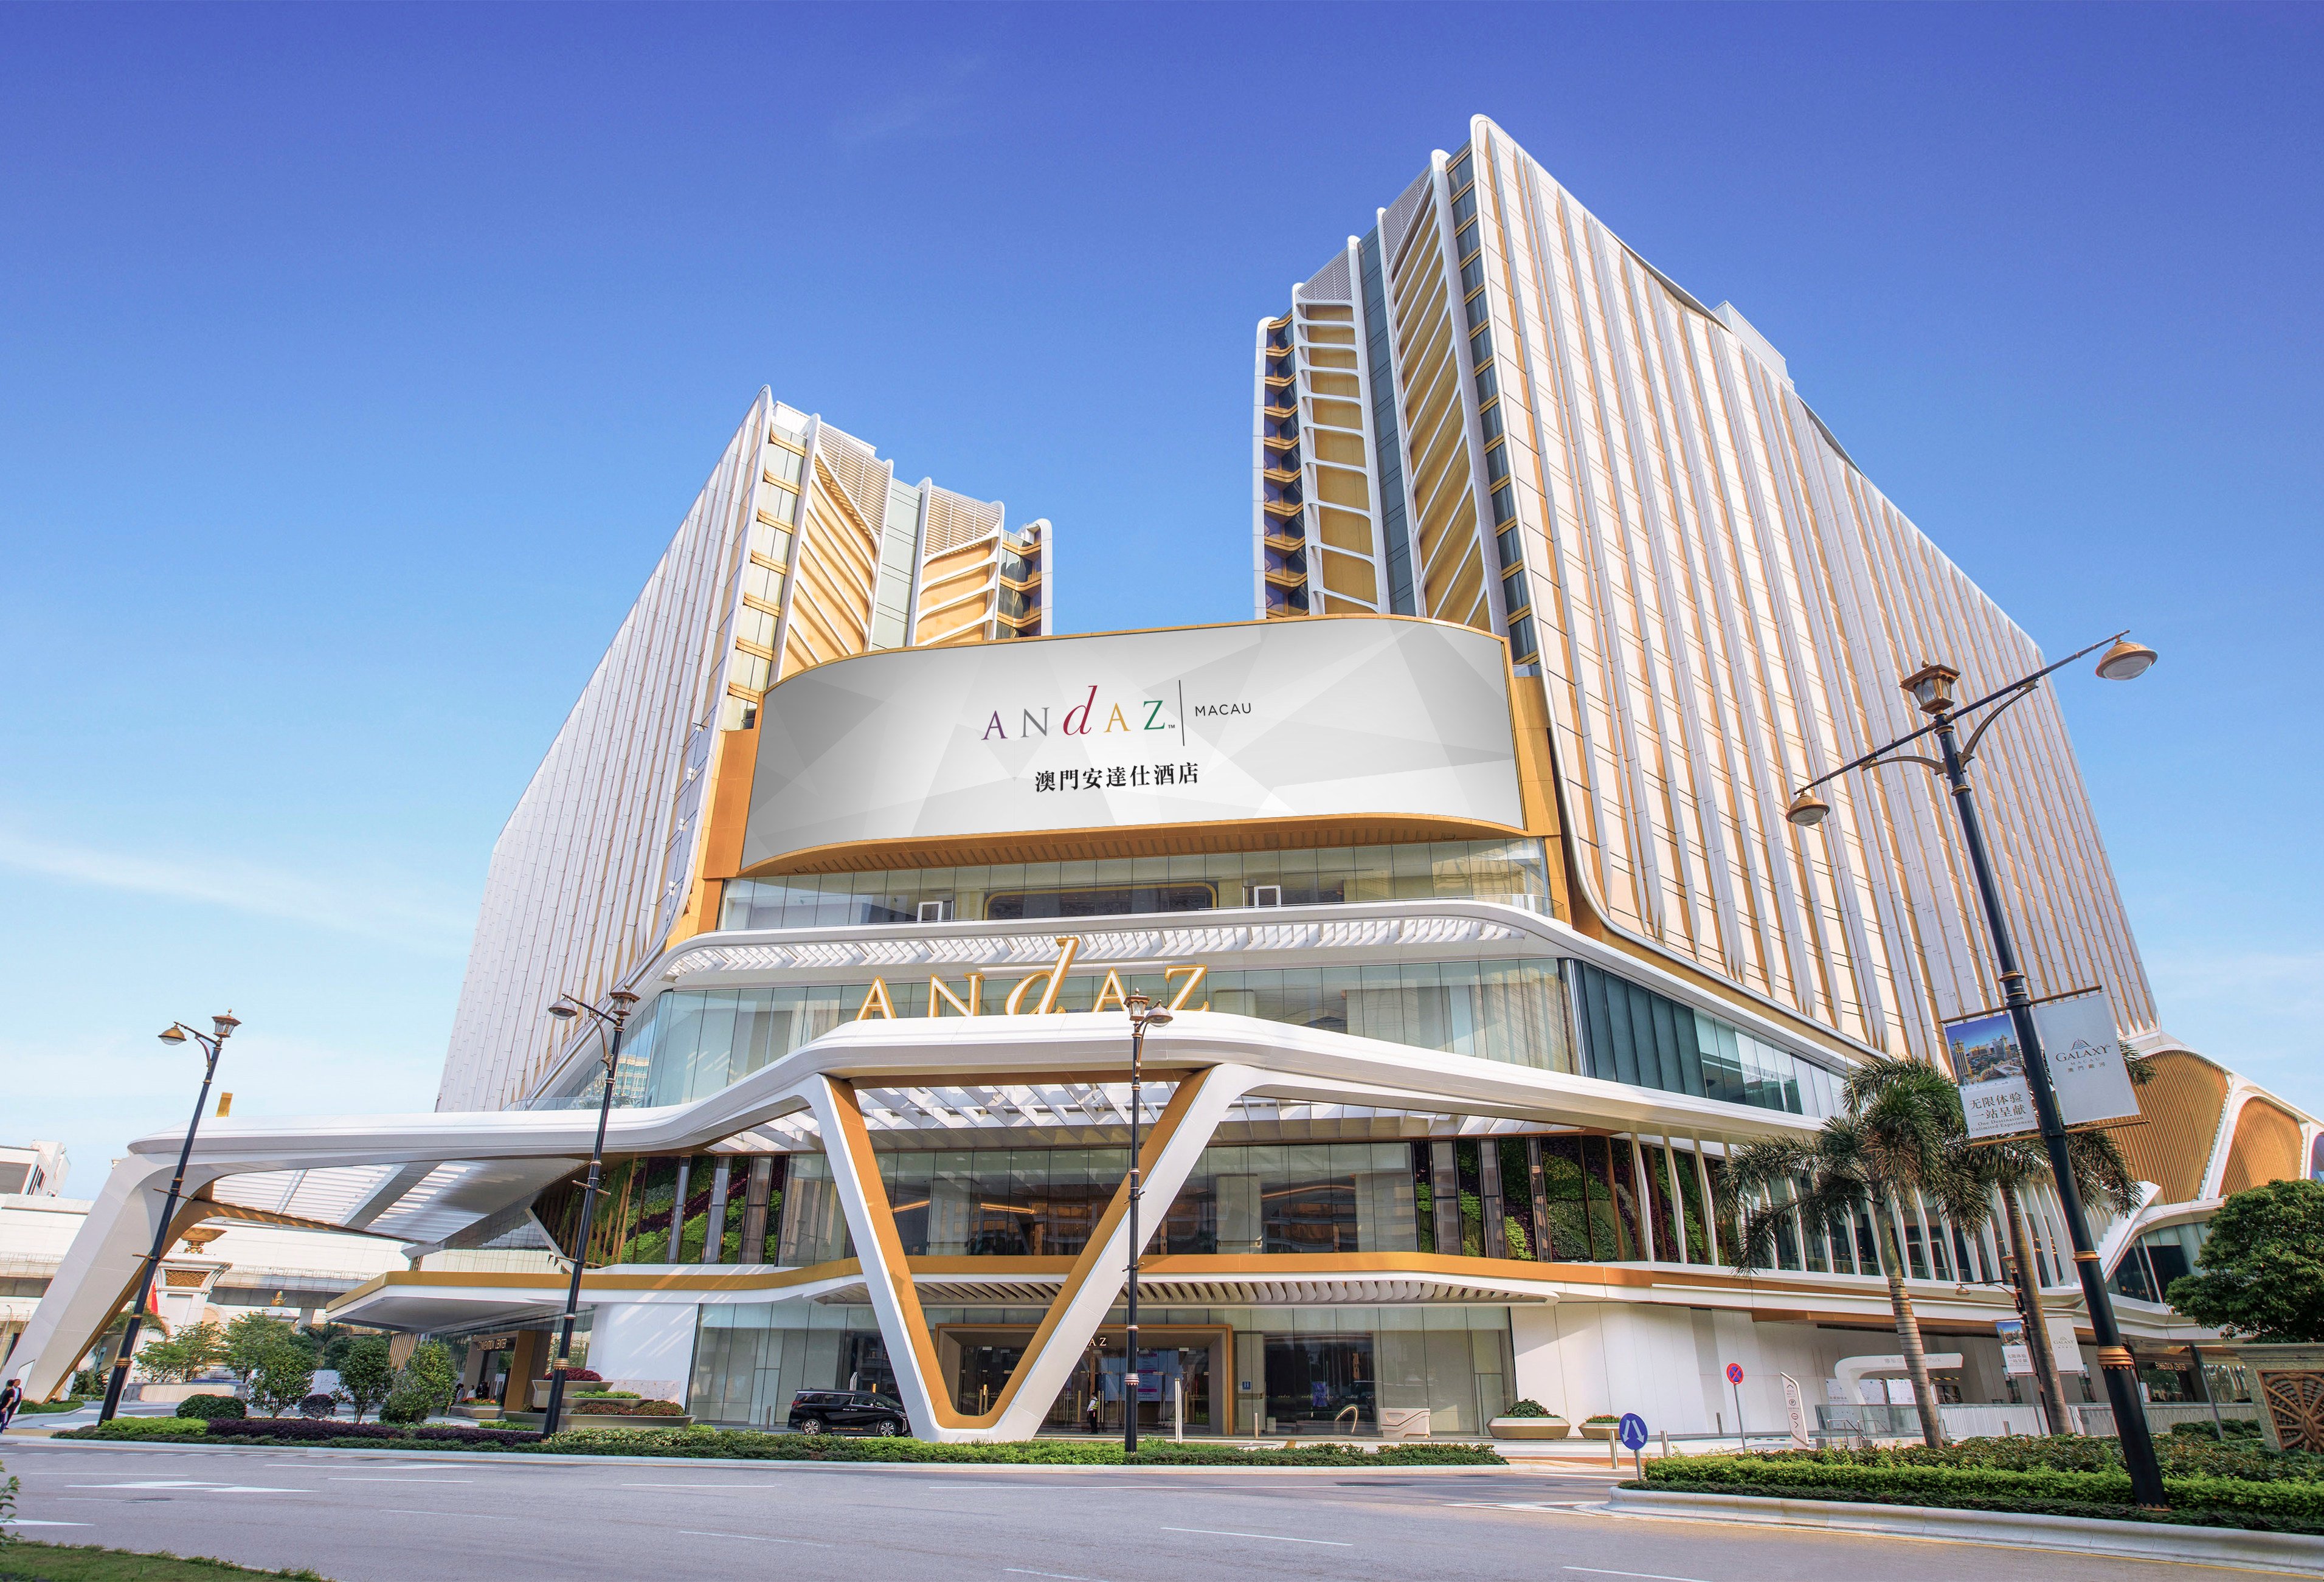 Andaz Macau’s excellent location offers convenient access to the resort’s wonderful amenities and attractions. Additionally, it serves as a gateway to the remarkable tourism and MICE facilities of Galaxy Macau.